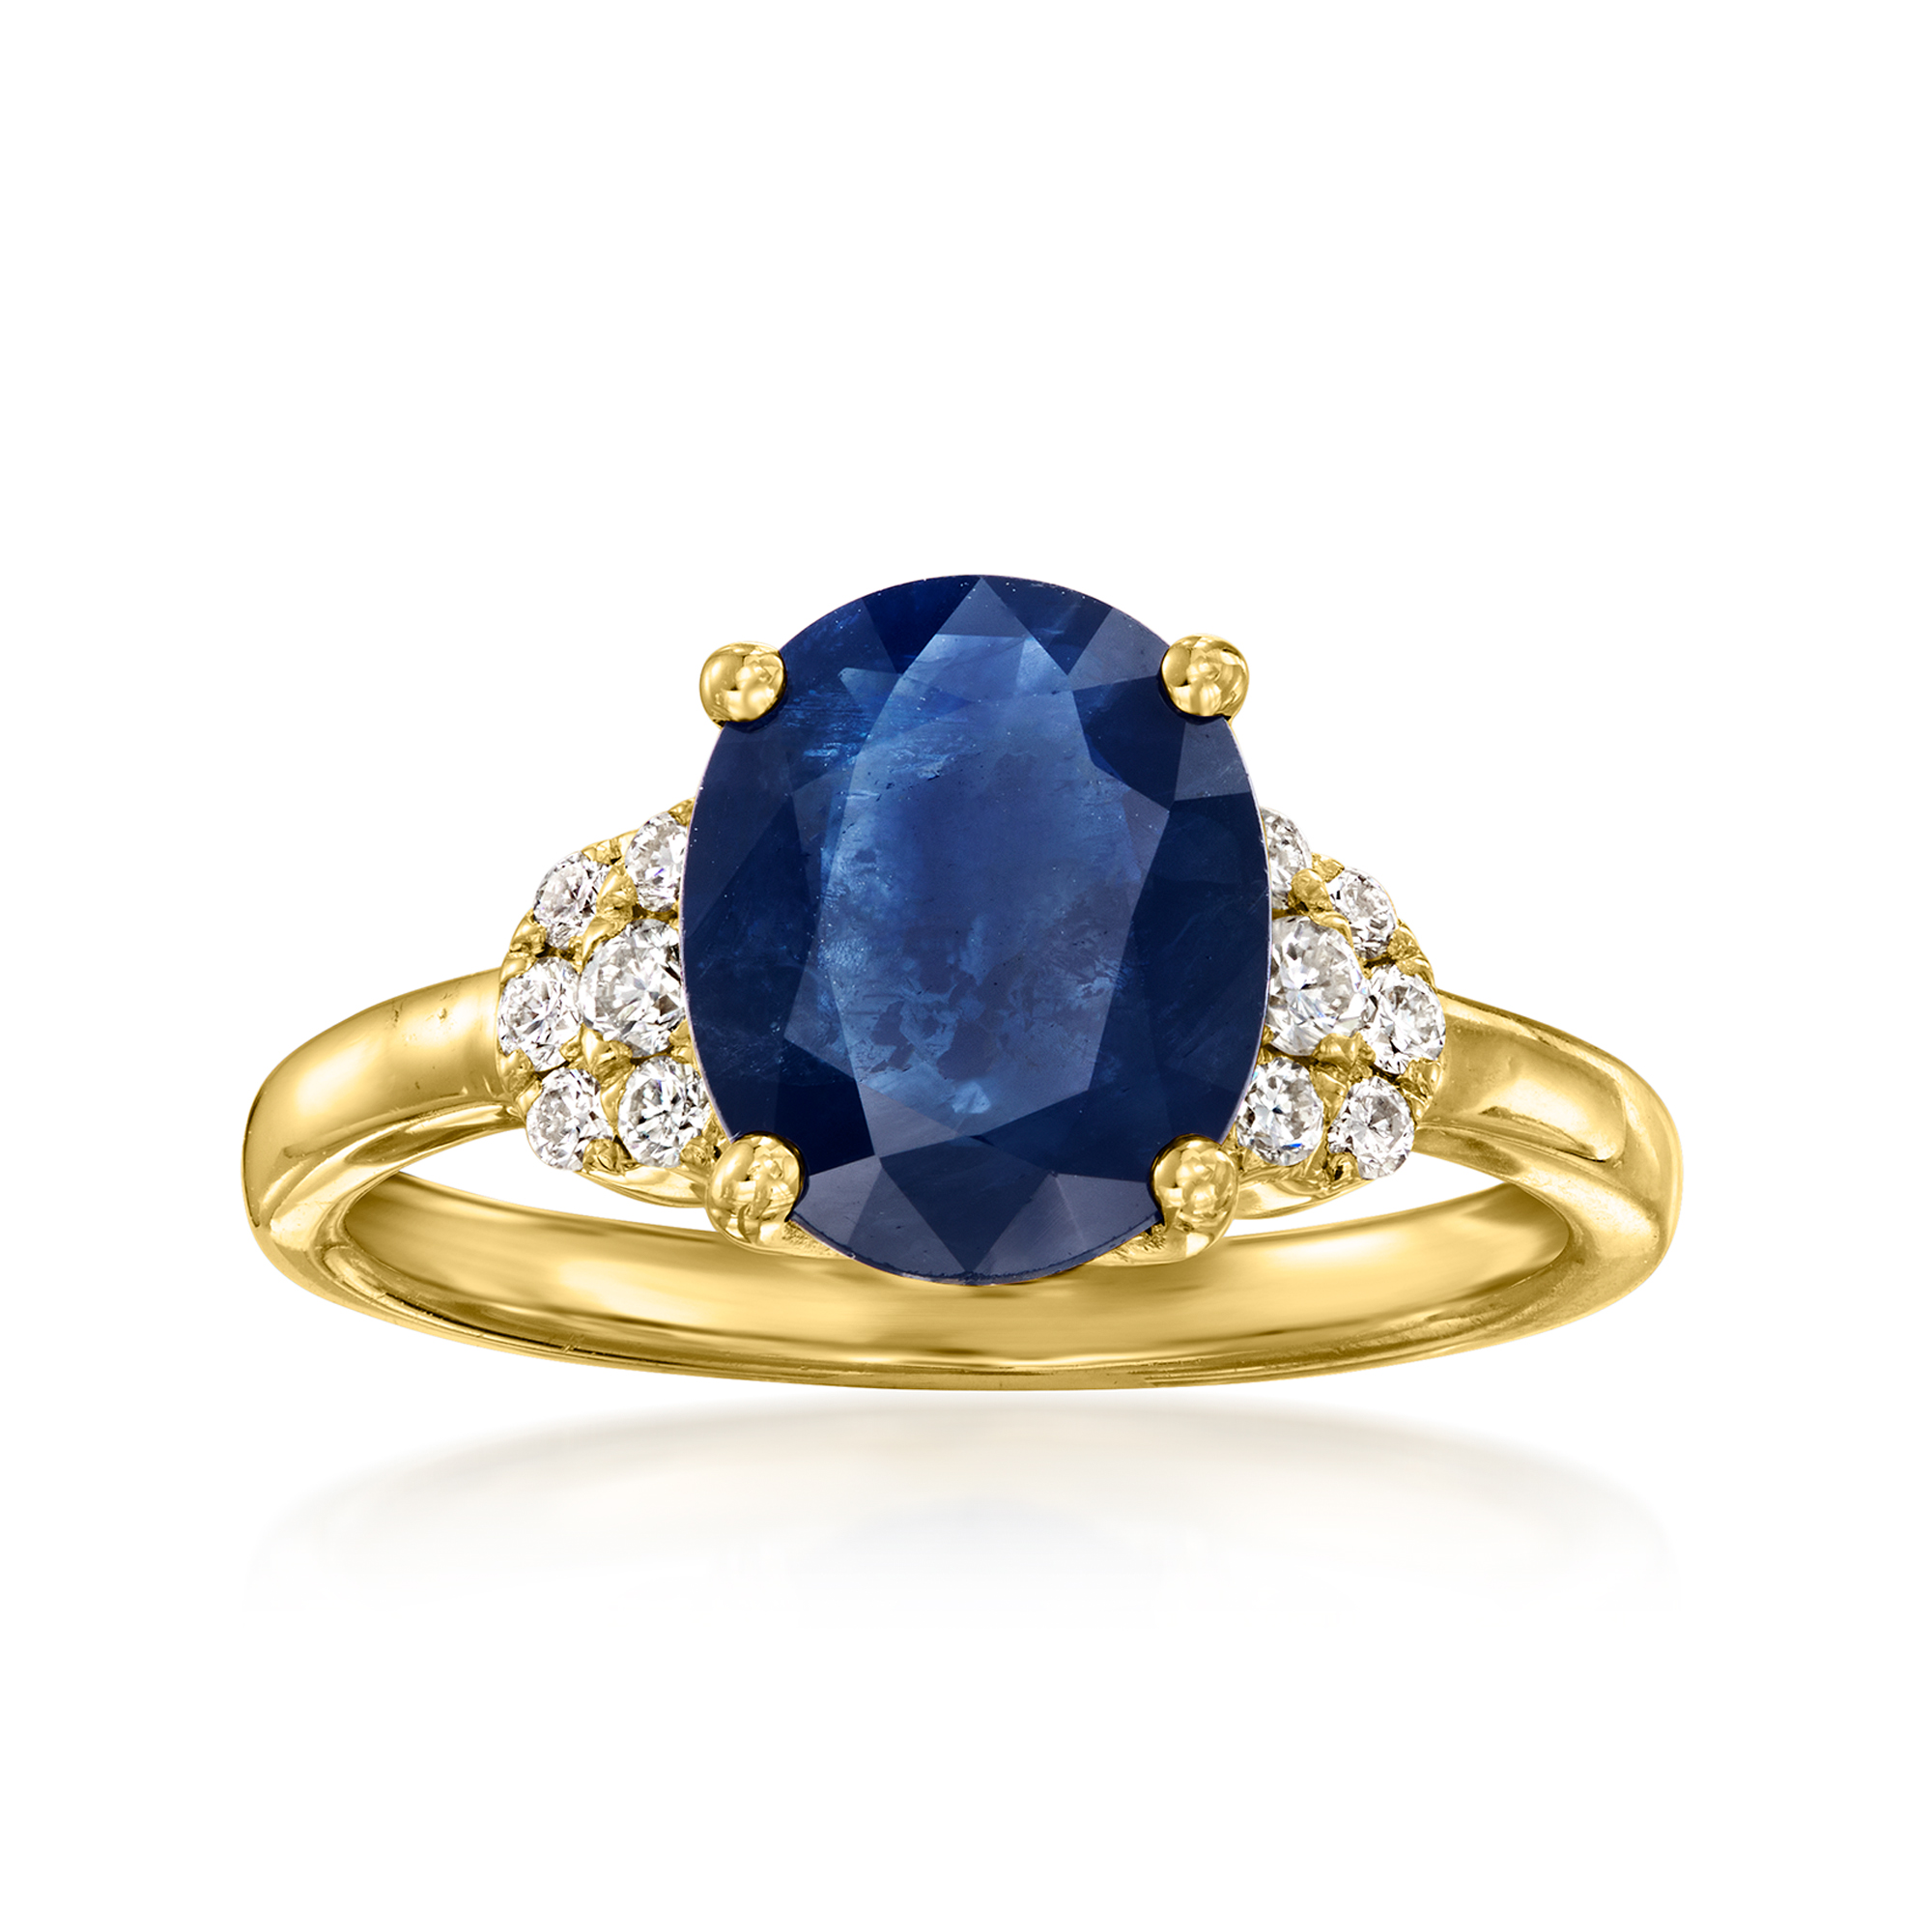 C. 1980 Vintage 2.50 Carat Sapphire and .25 ct. t.w. Diamond Ring in 14kt  Yellow Gold. Size 5.75